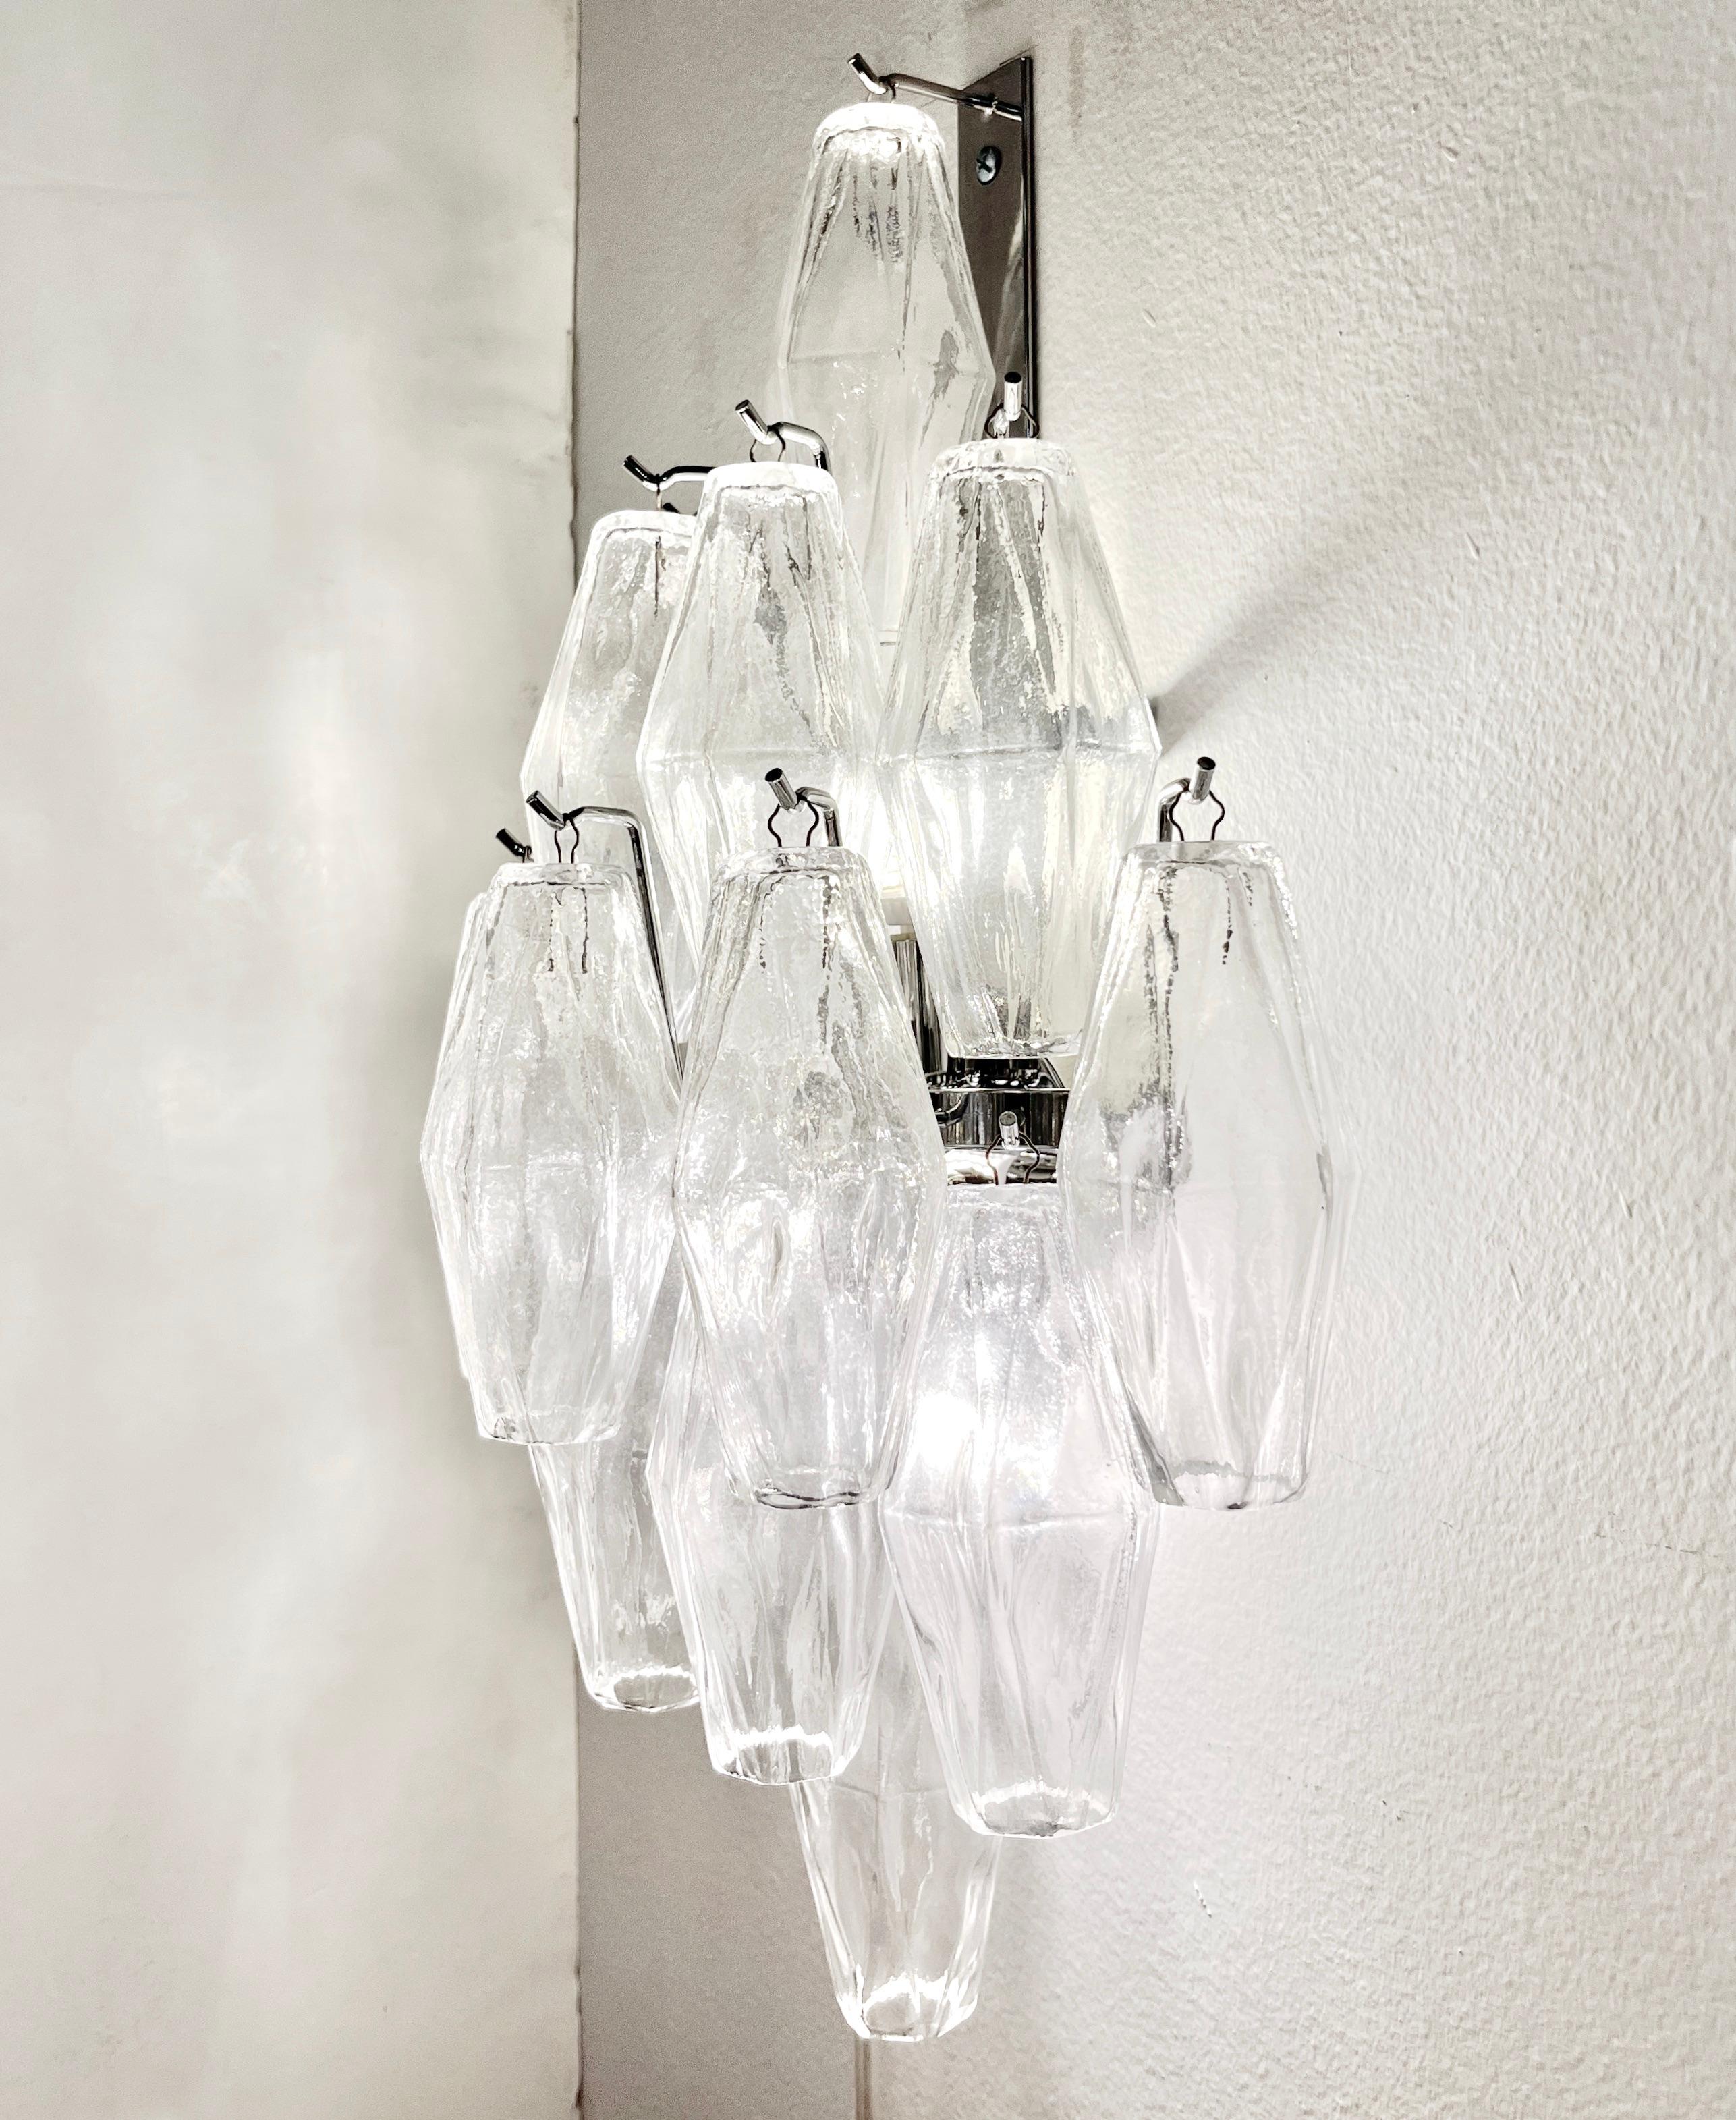 Hand-Crafted Contemporary Italian Poliedri Crystal Clear Murano Glass Multi-Tier Wall Lights For Sale